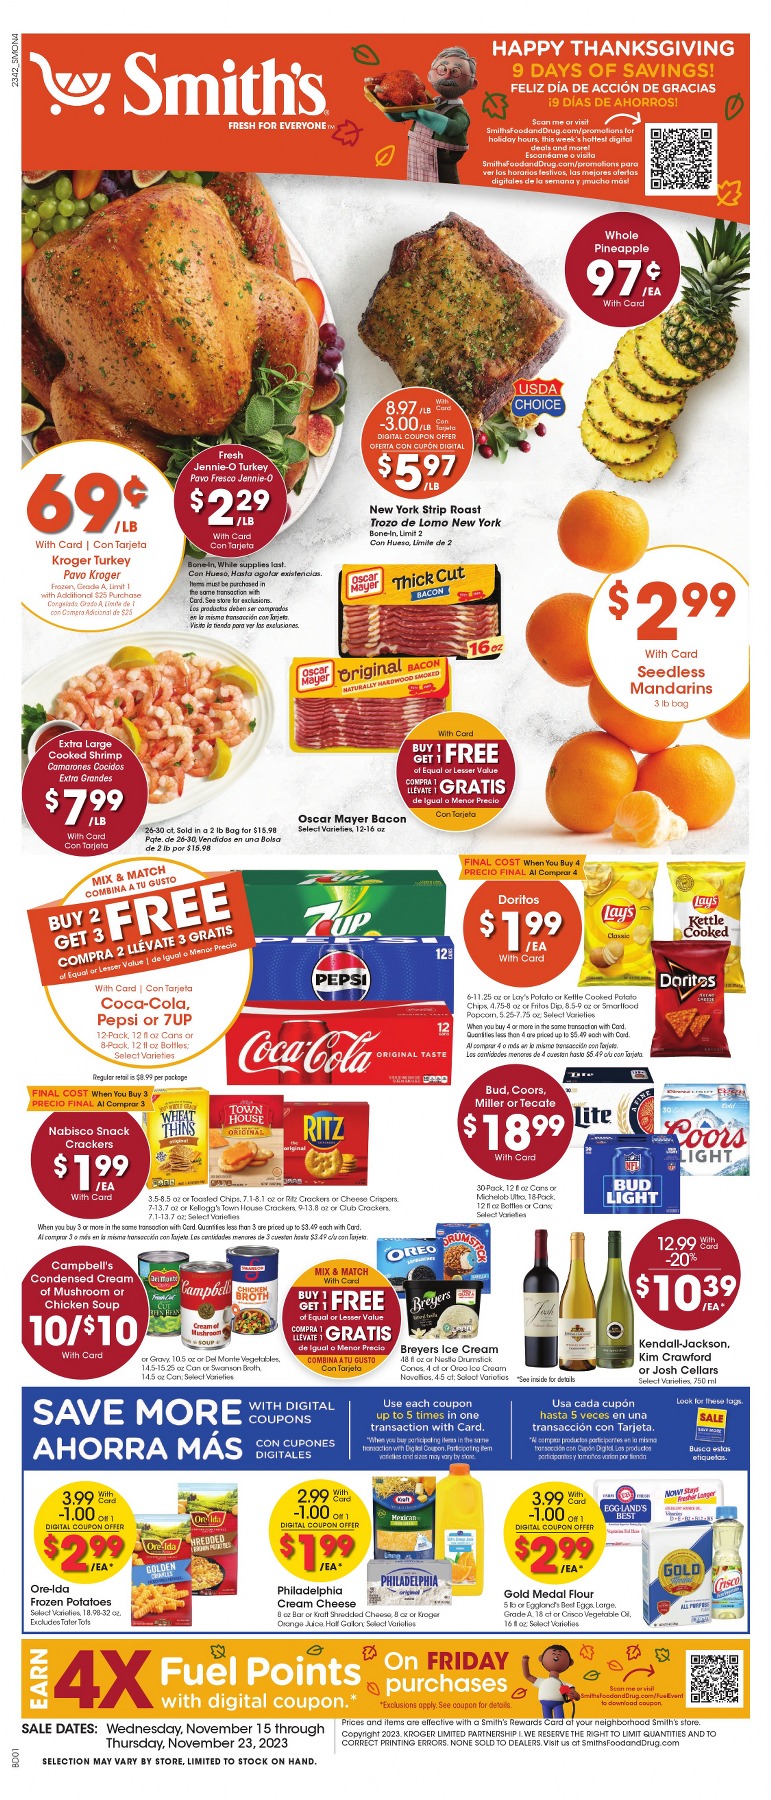 Smith's Christmas Deals 2023 1 – smiths ad 1 1